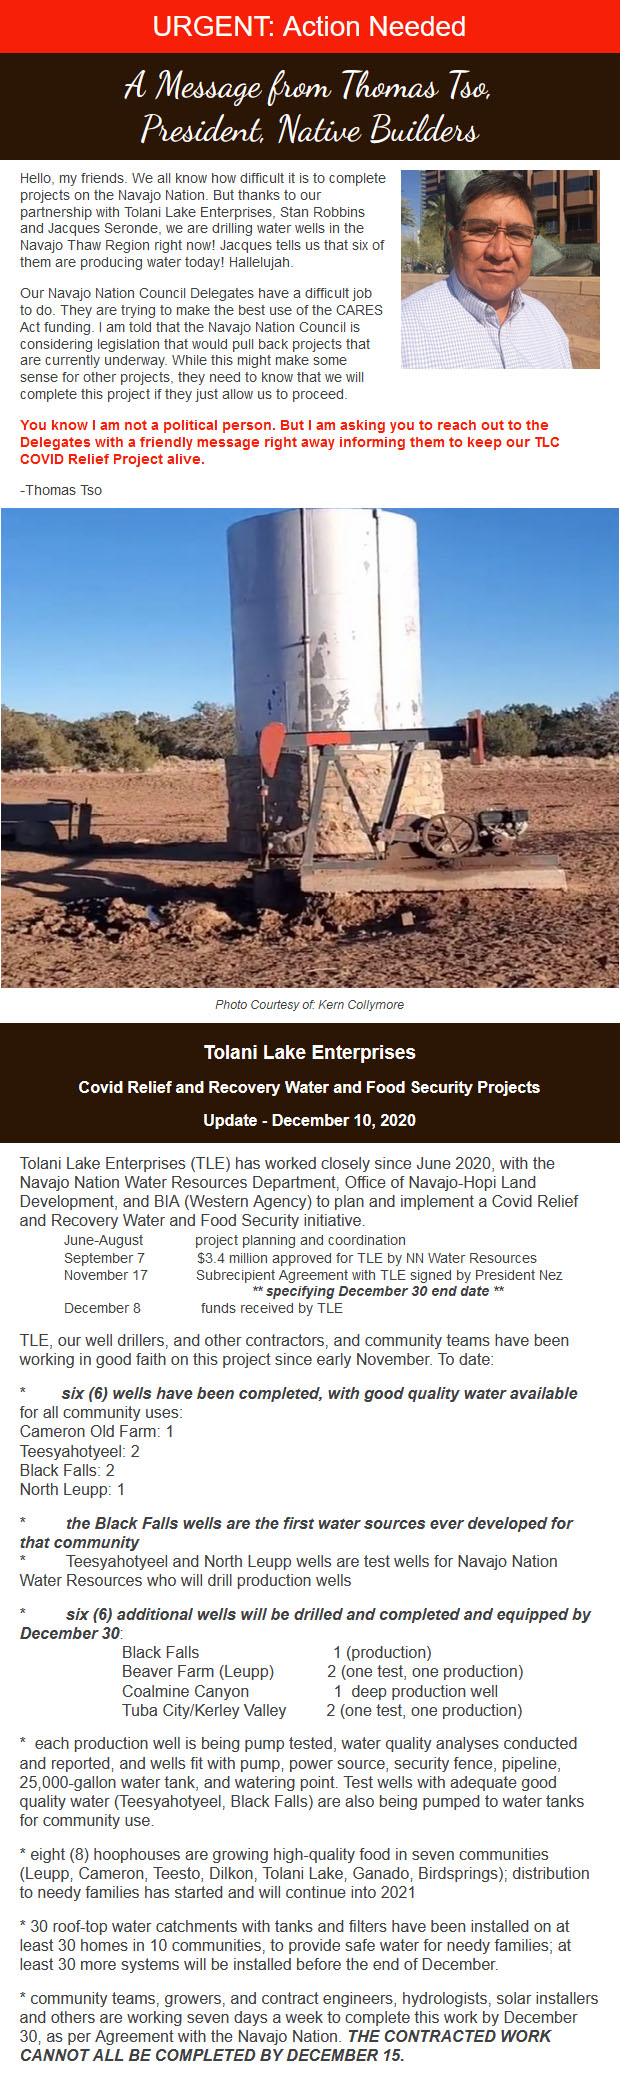 URGENT-Action-Needed-A-Message-from-Thomas-Tso-President-Native-Builders